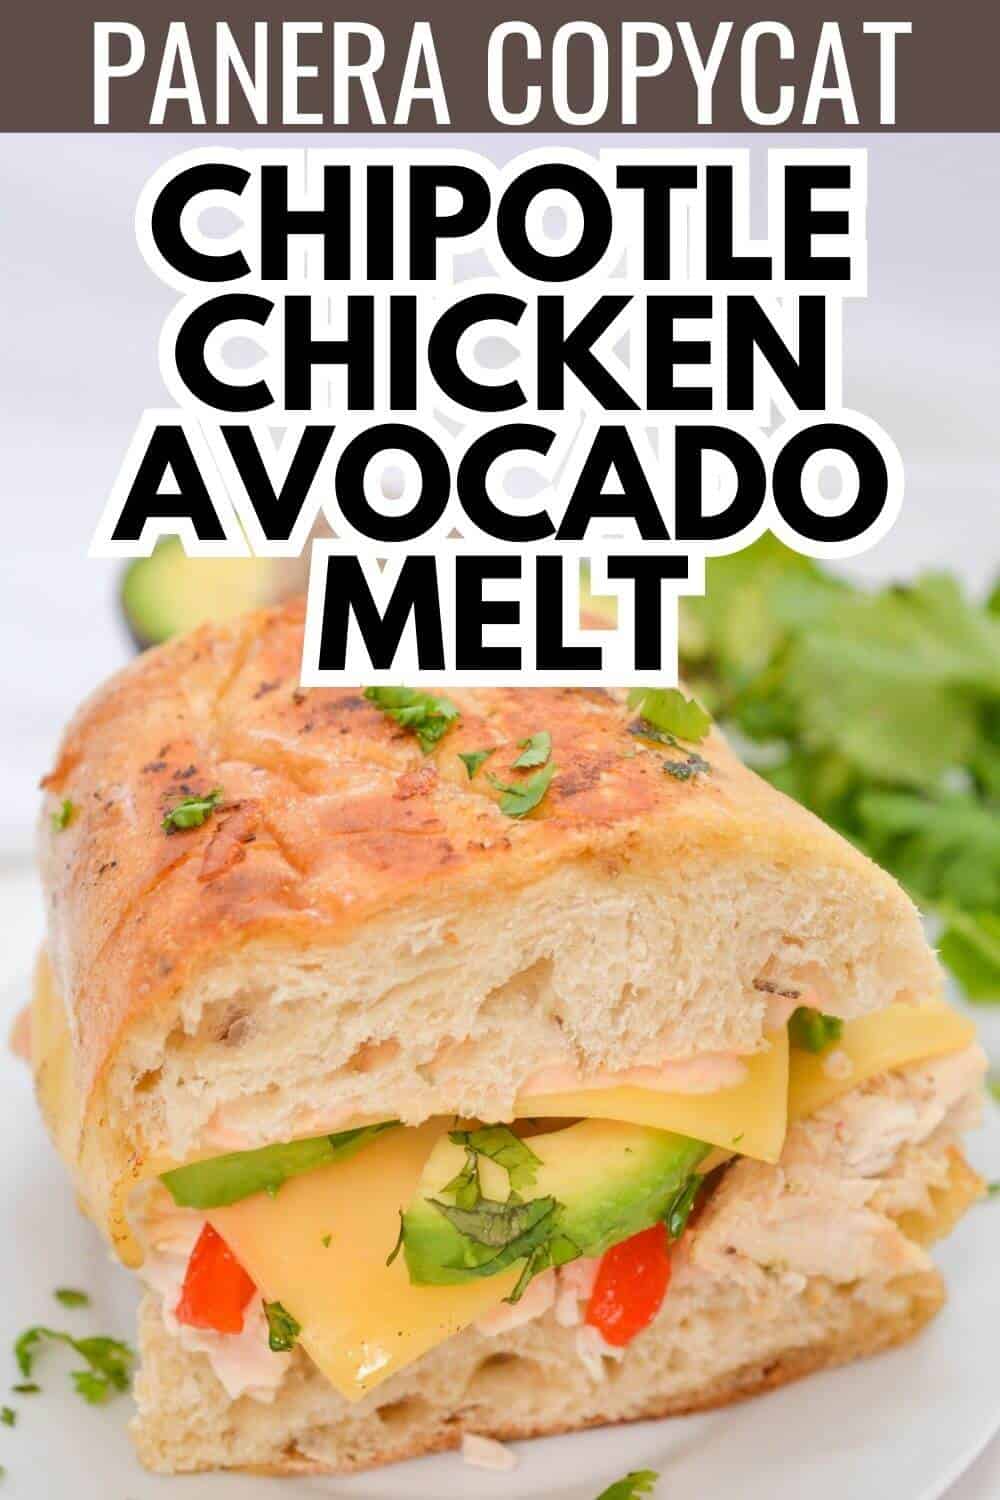 Chipotle chicken avocado melt with recipe title text.